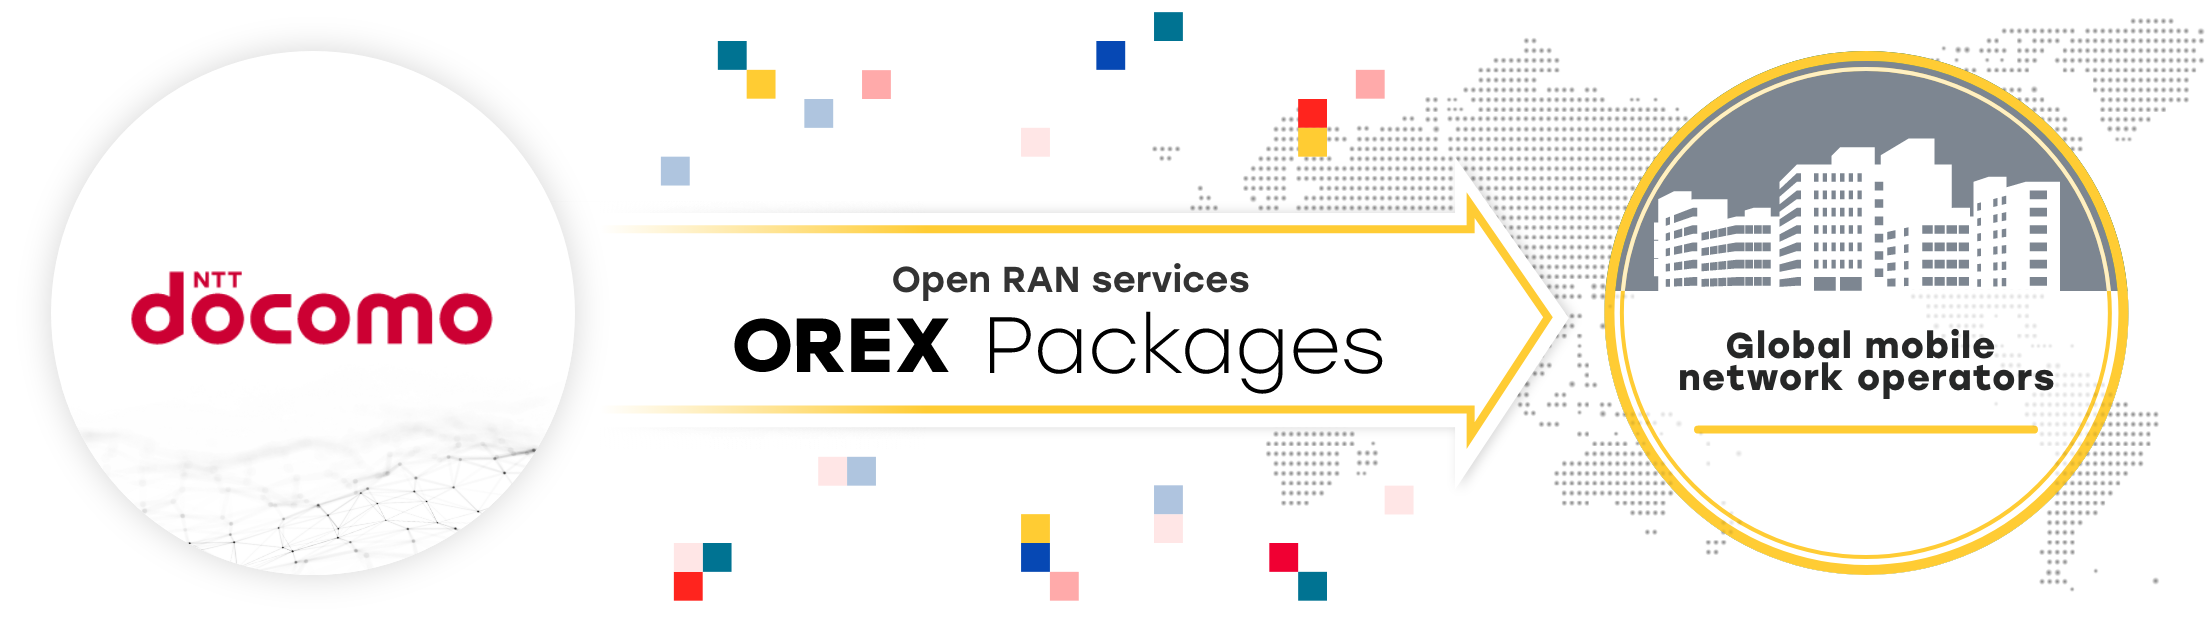 Open RAN services OREX Packages